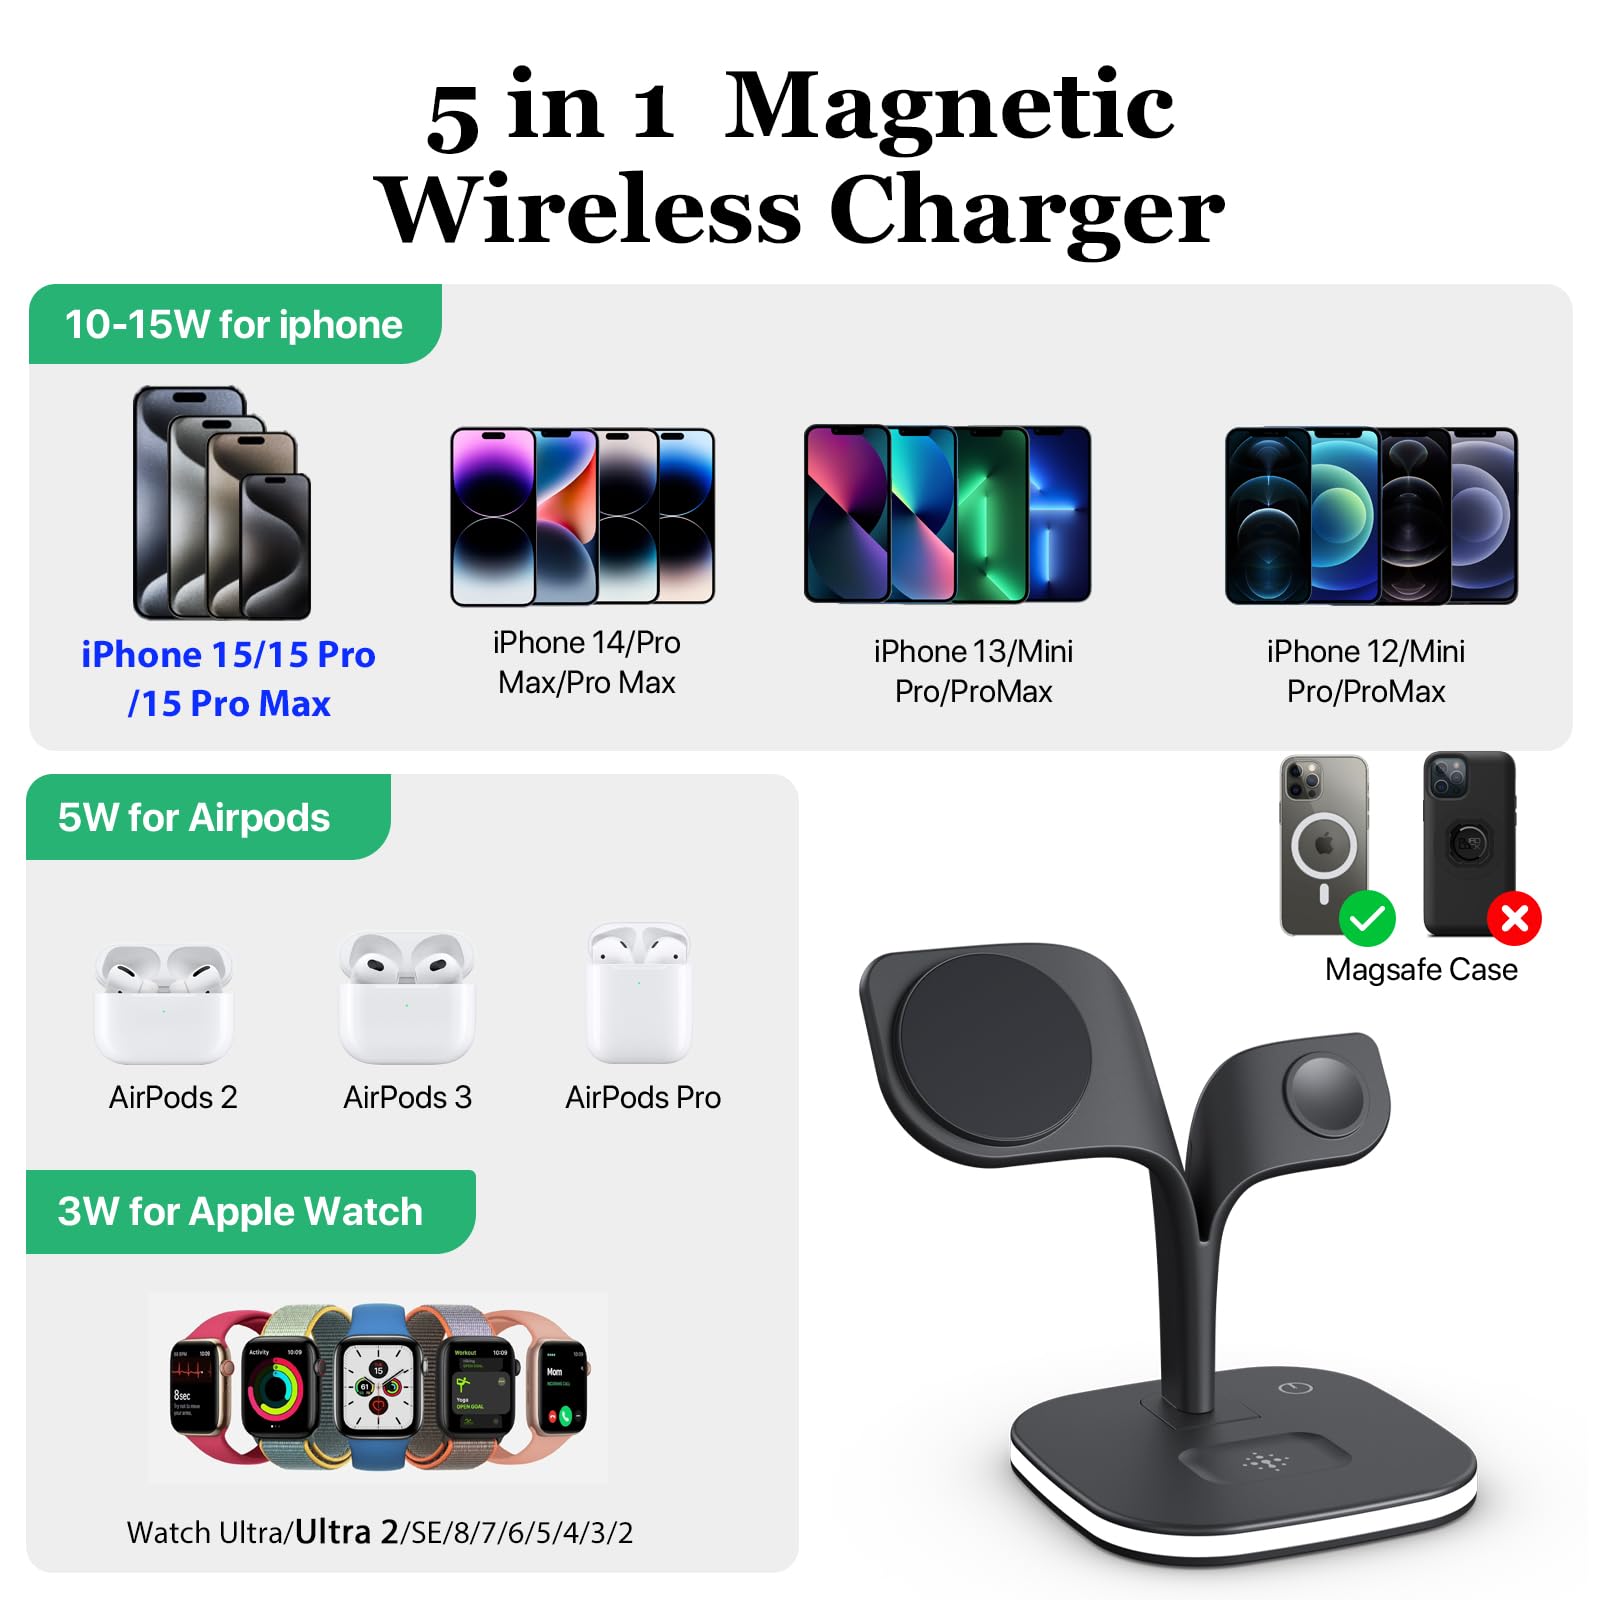 Wireless Charging Station, 5 in 1 Fast Mag Safe Magnetic Charger Stand for iPhone 14,13,12 Pro/Max/Mini/Plus, Apple Watch Ultra 8/7/6/SE/5/4/3/2 and Airpods 3/2/Pro (Black) (Black)